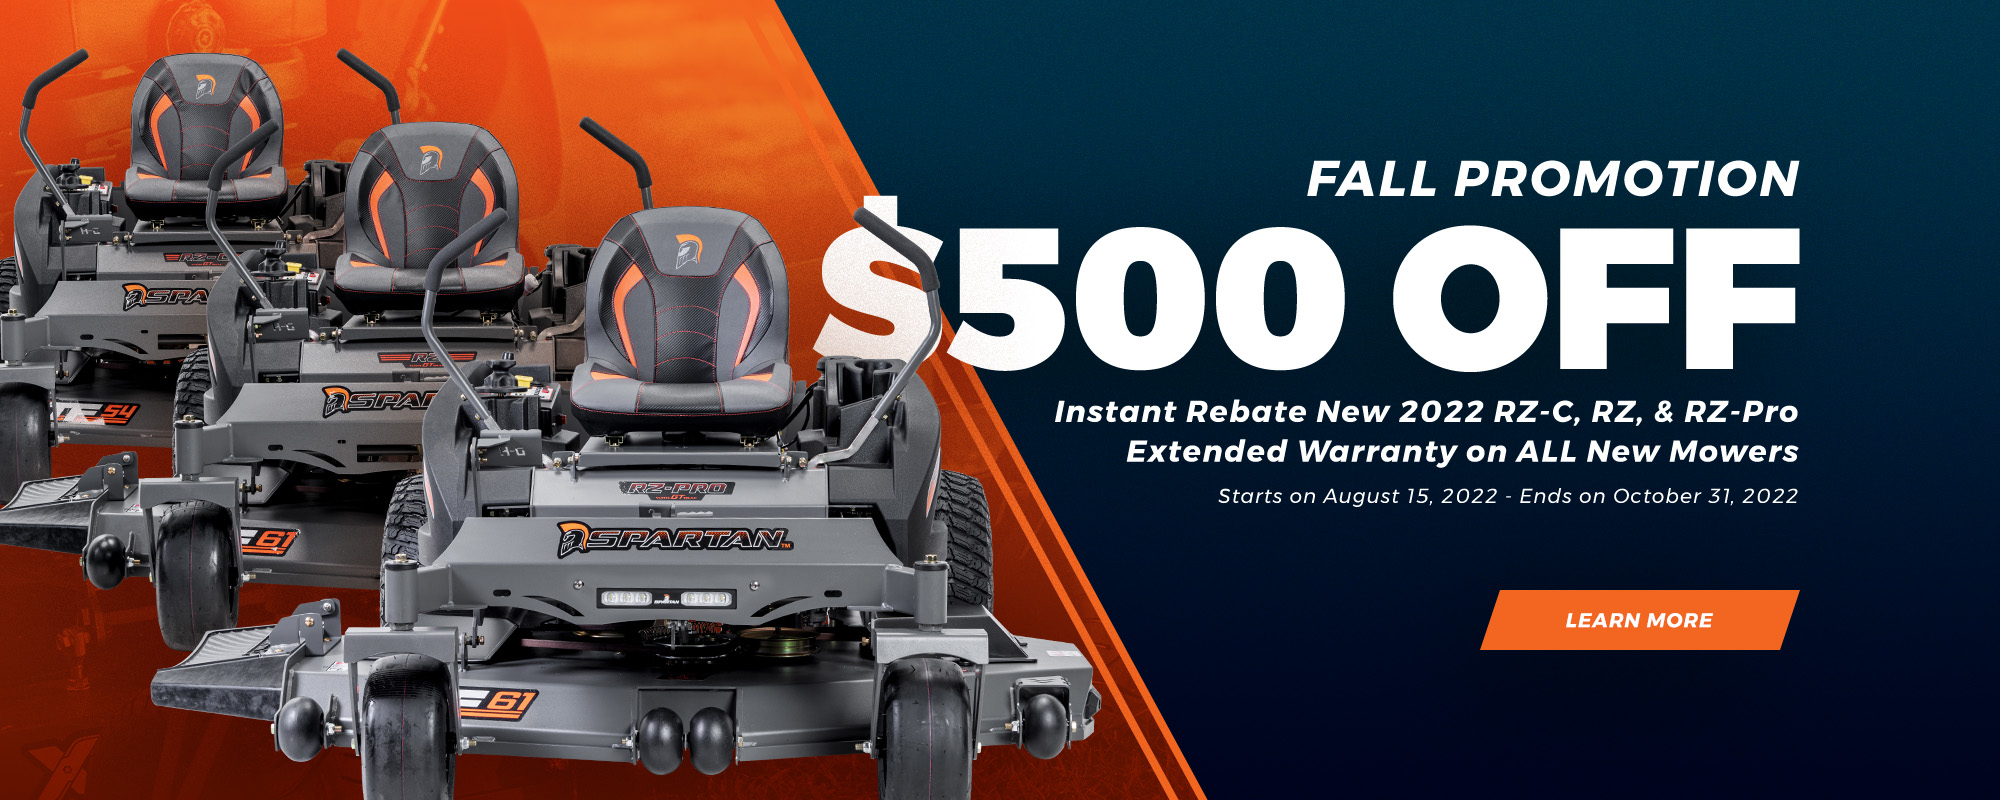 Spartan advertisement: Fall promotion